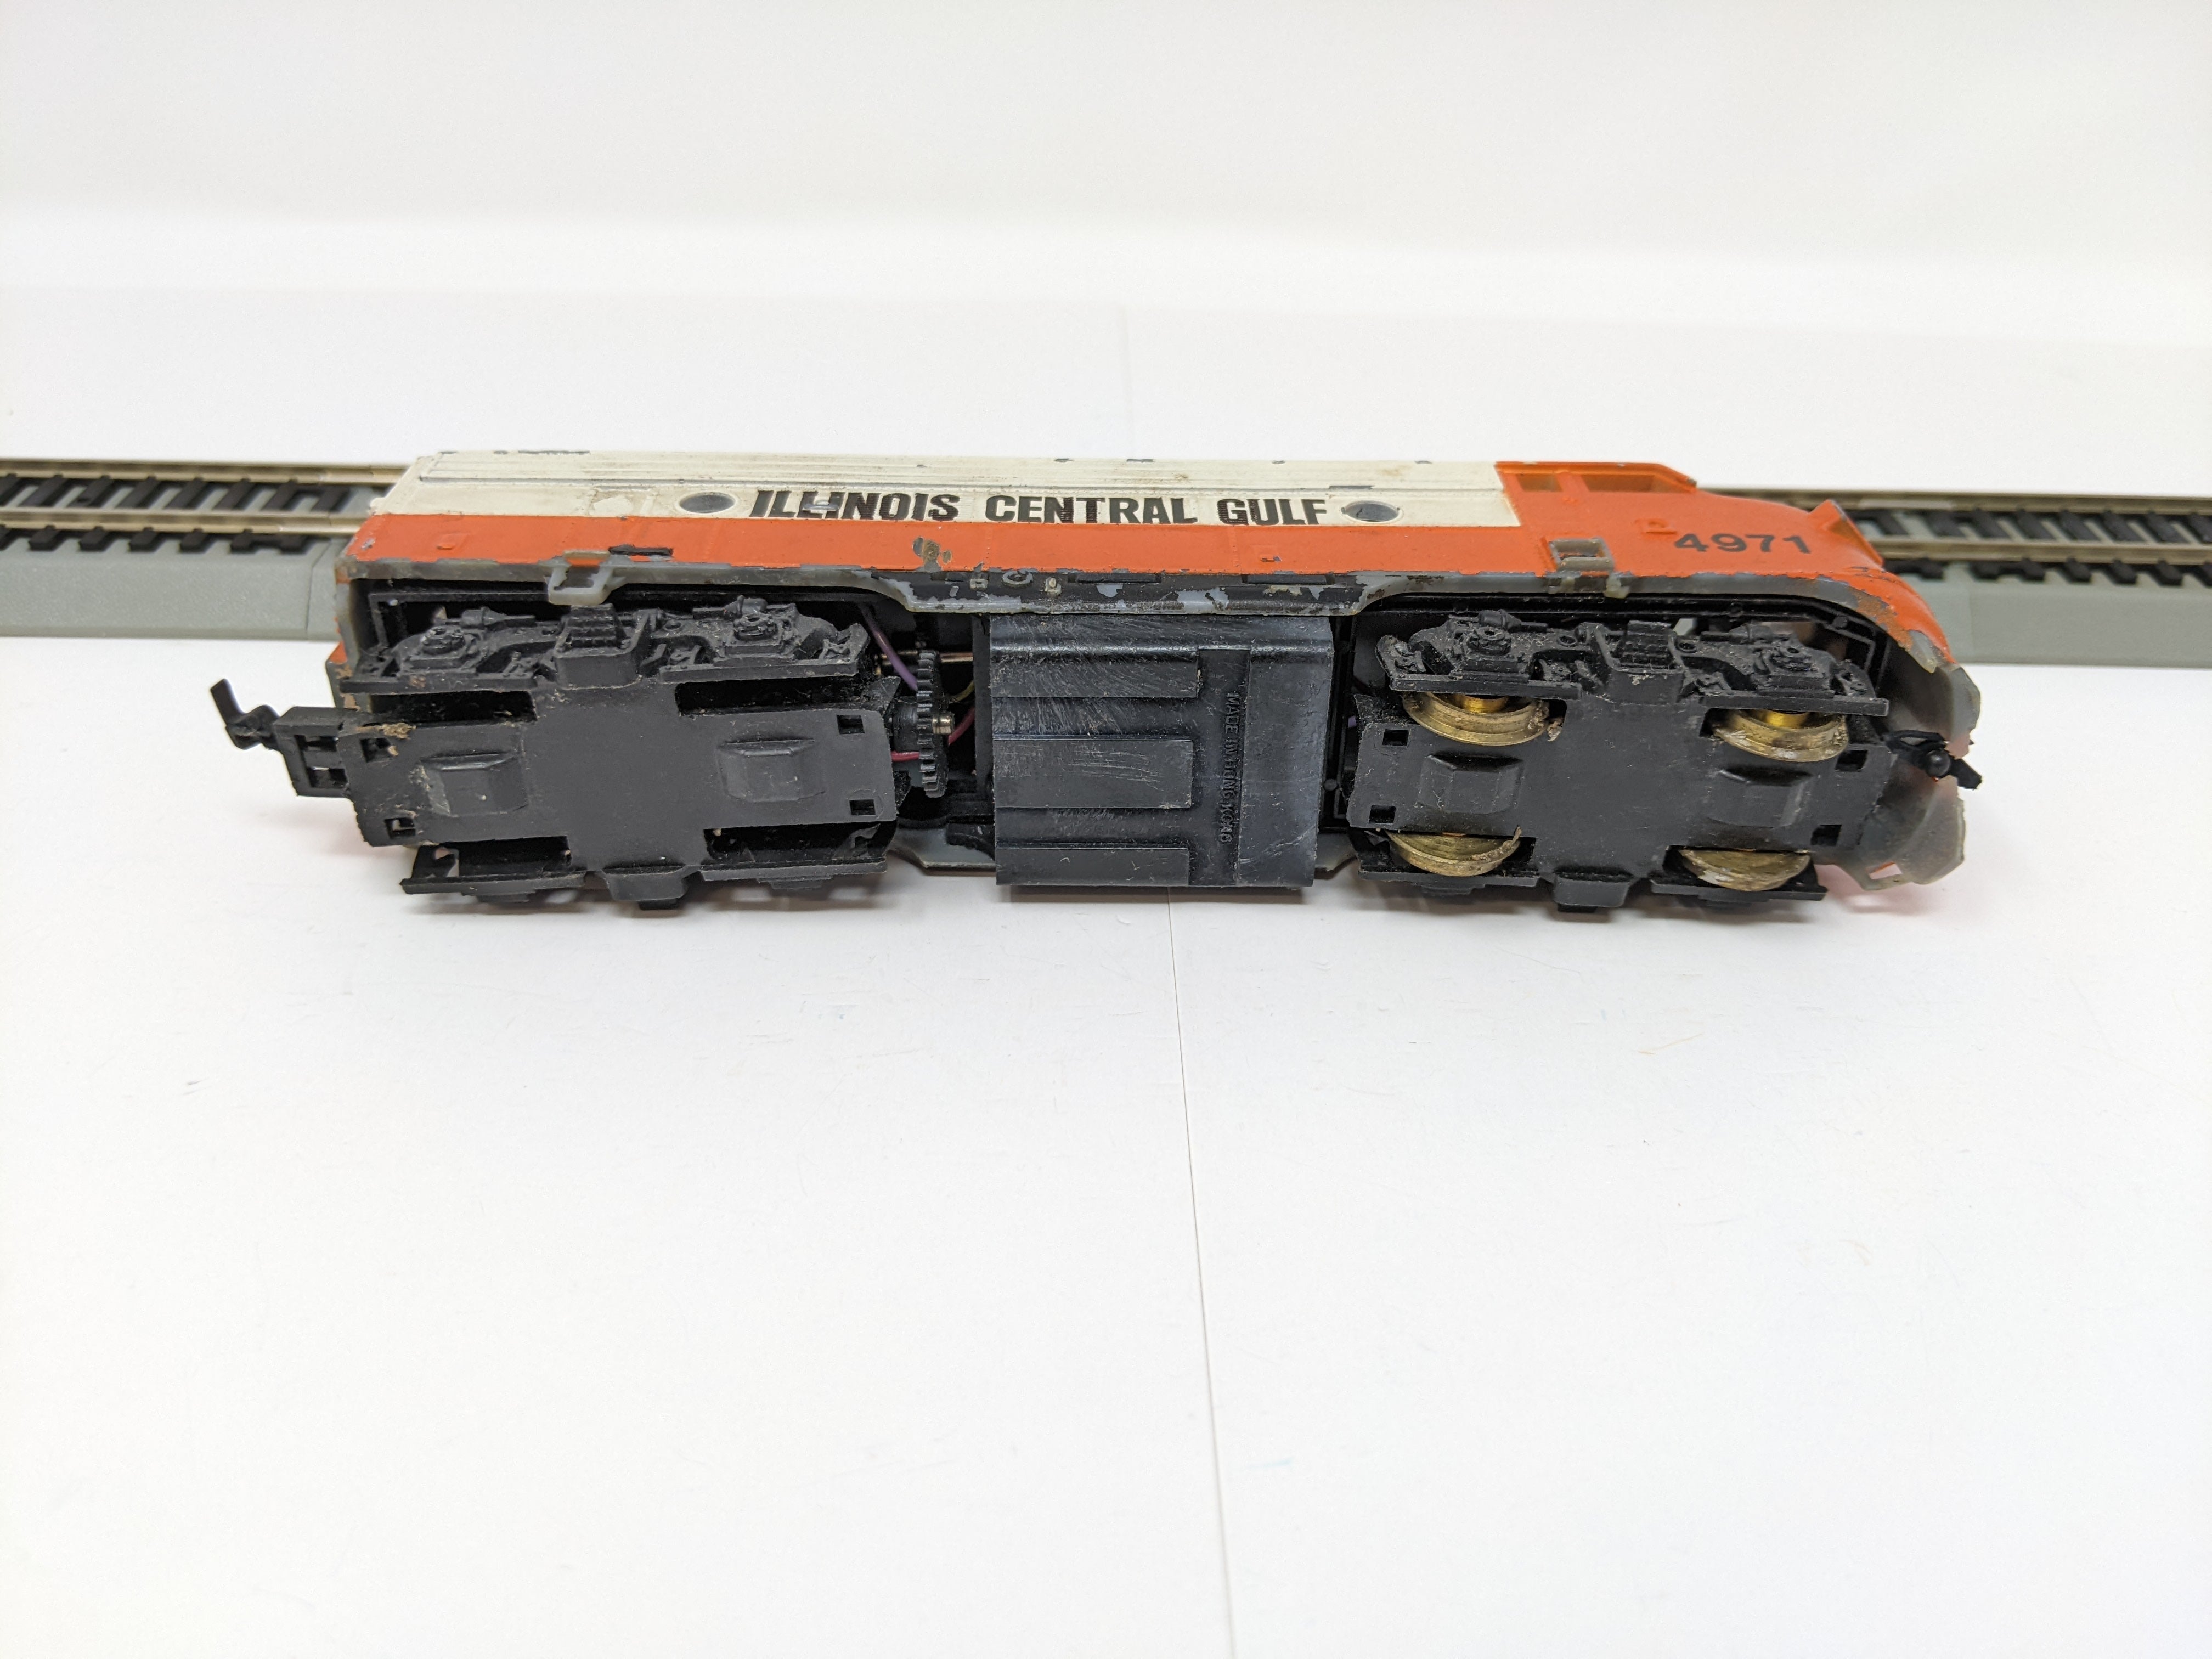 USED Life-Like HO Scale, F7A Diesel Locomotive, Illinois Central Gulf  #4971, Needs Work (DC)